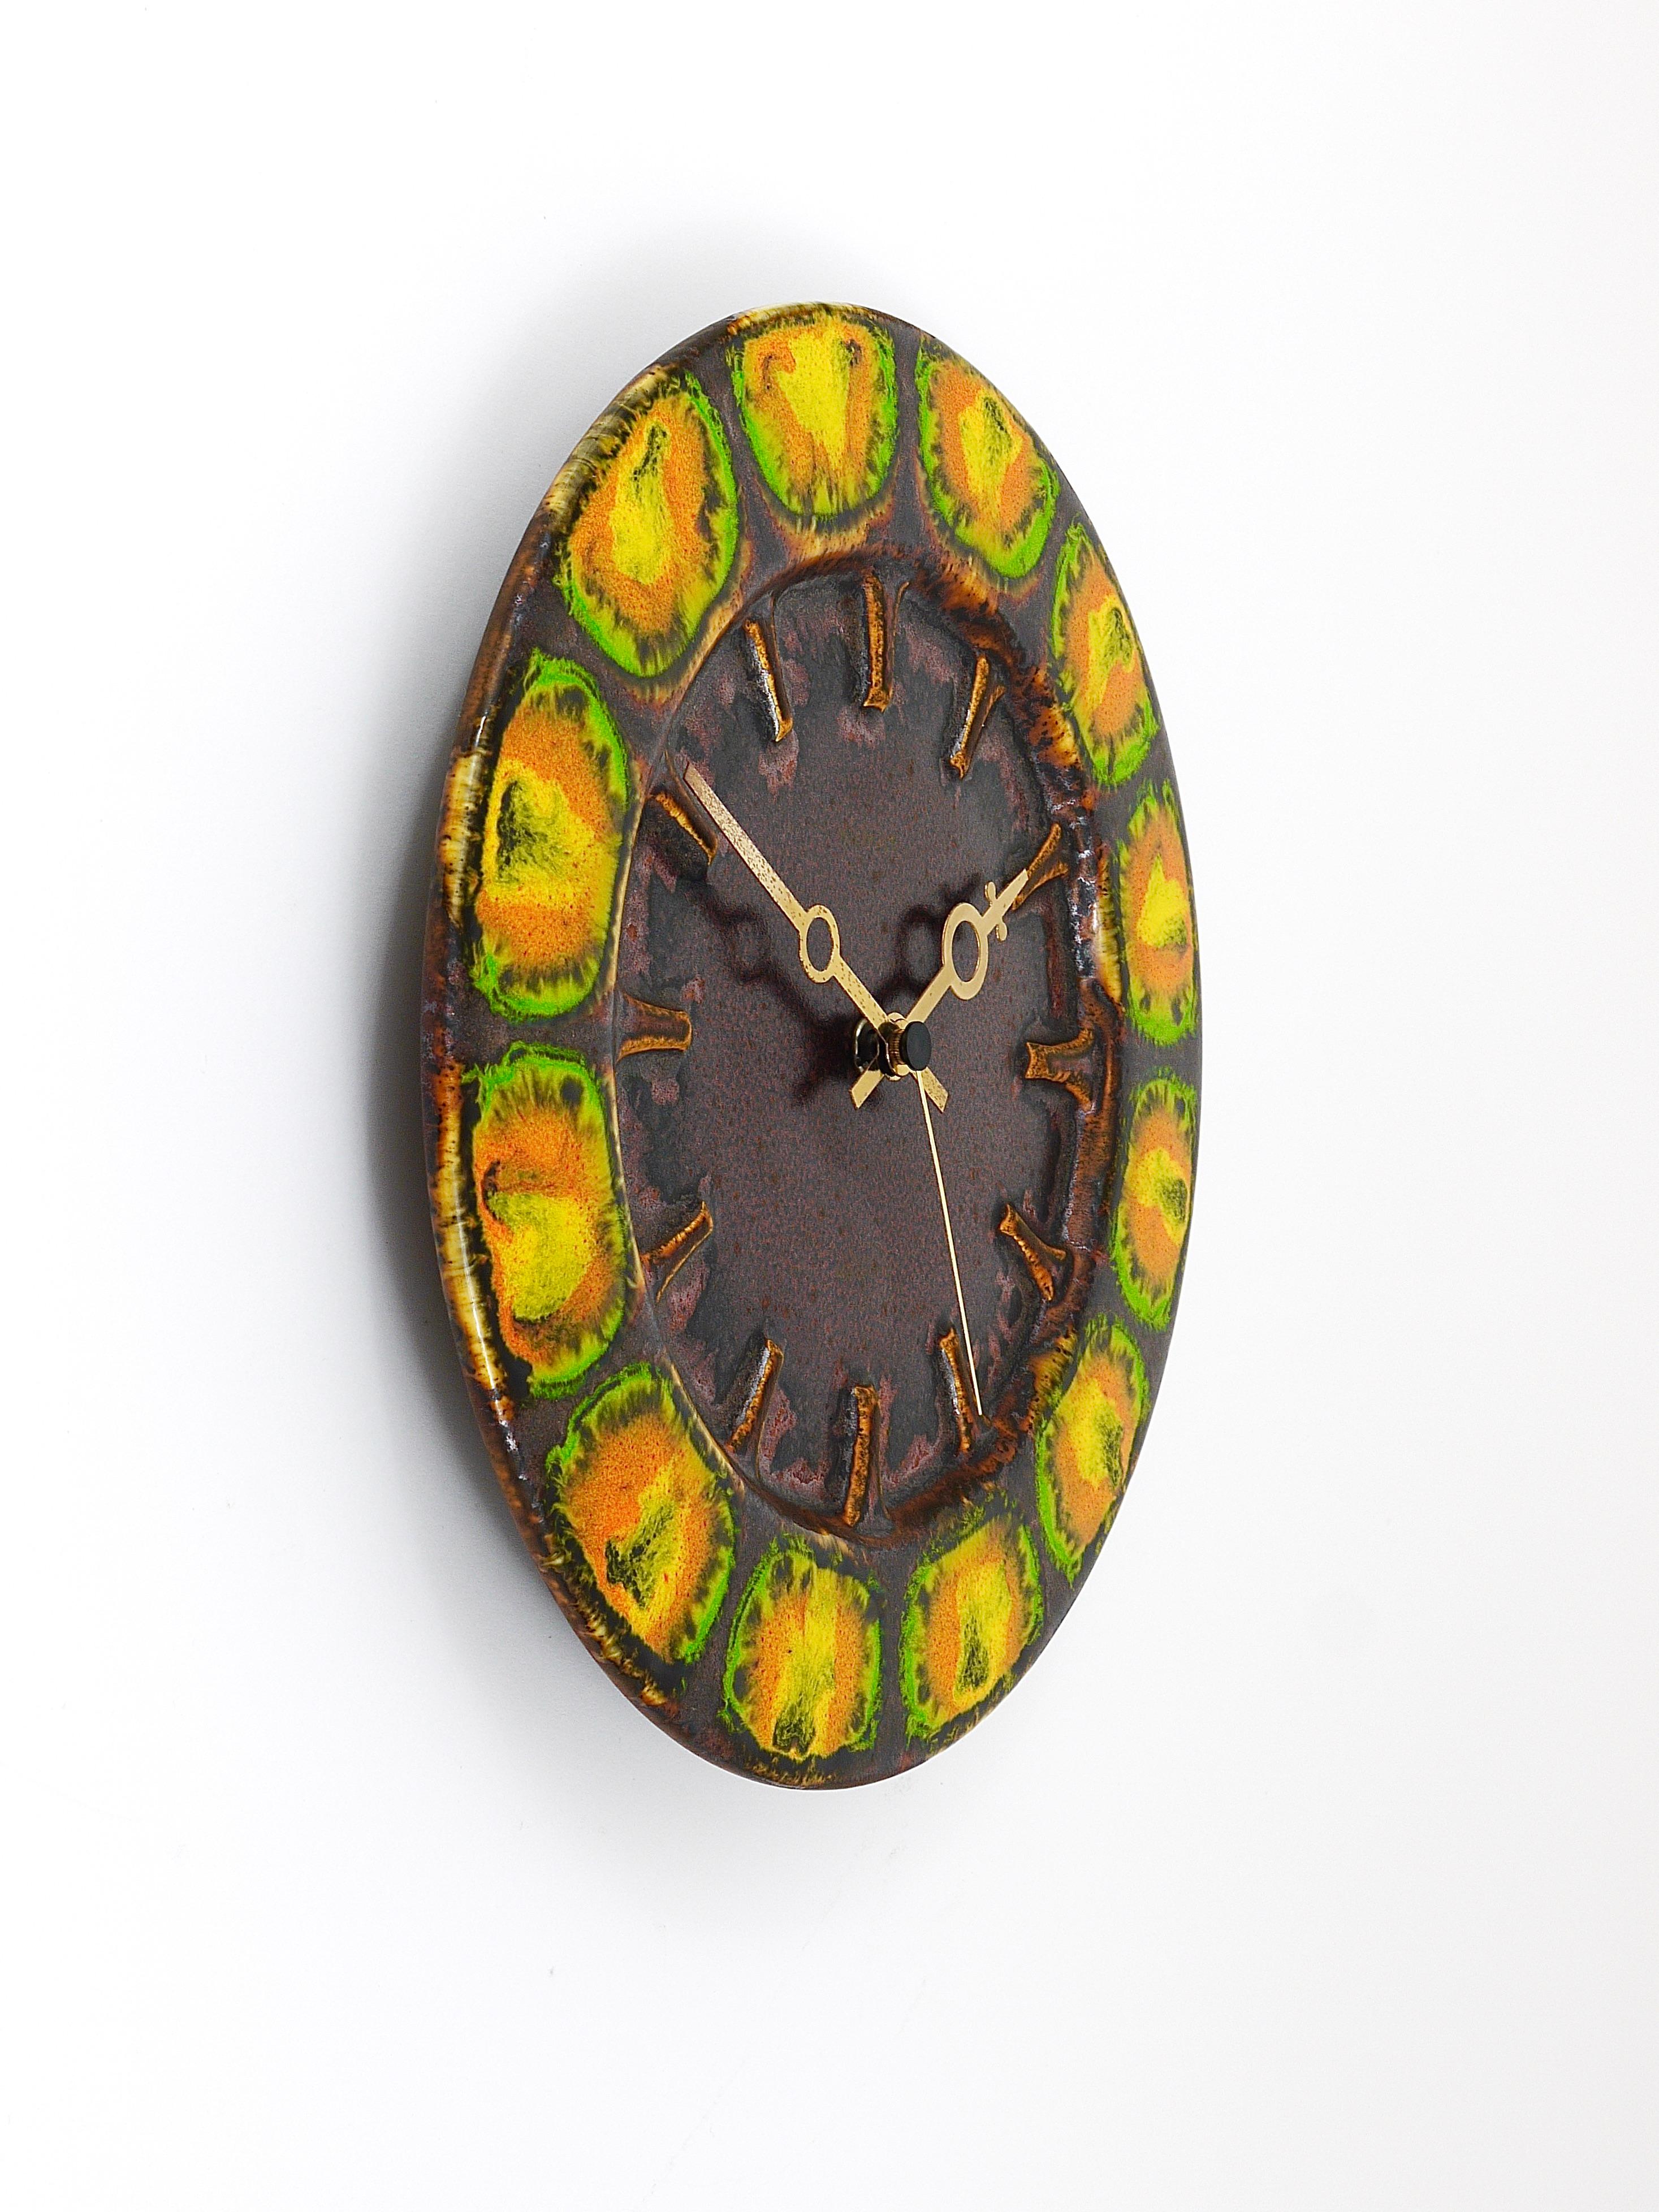 A beautiful round Midcentury Brutalist wall clock, executed by Kienzle Germany in the 1970s. The clock has a housing made of ceramic with a colorful enamel glaze in brown, green, yellow and orange and stylish golden hands. Powered by a standard